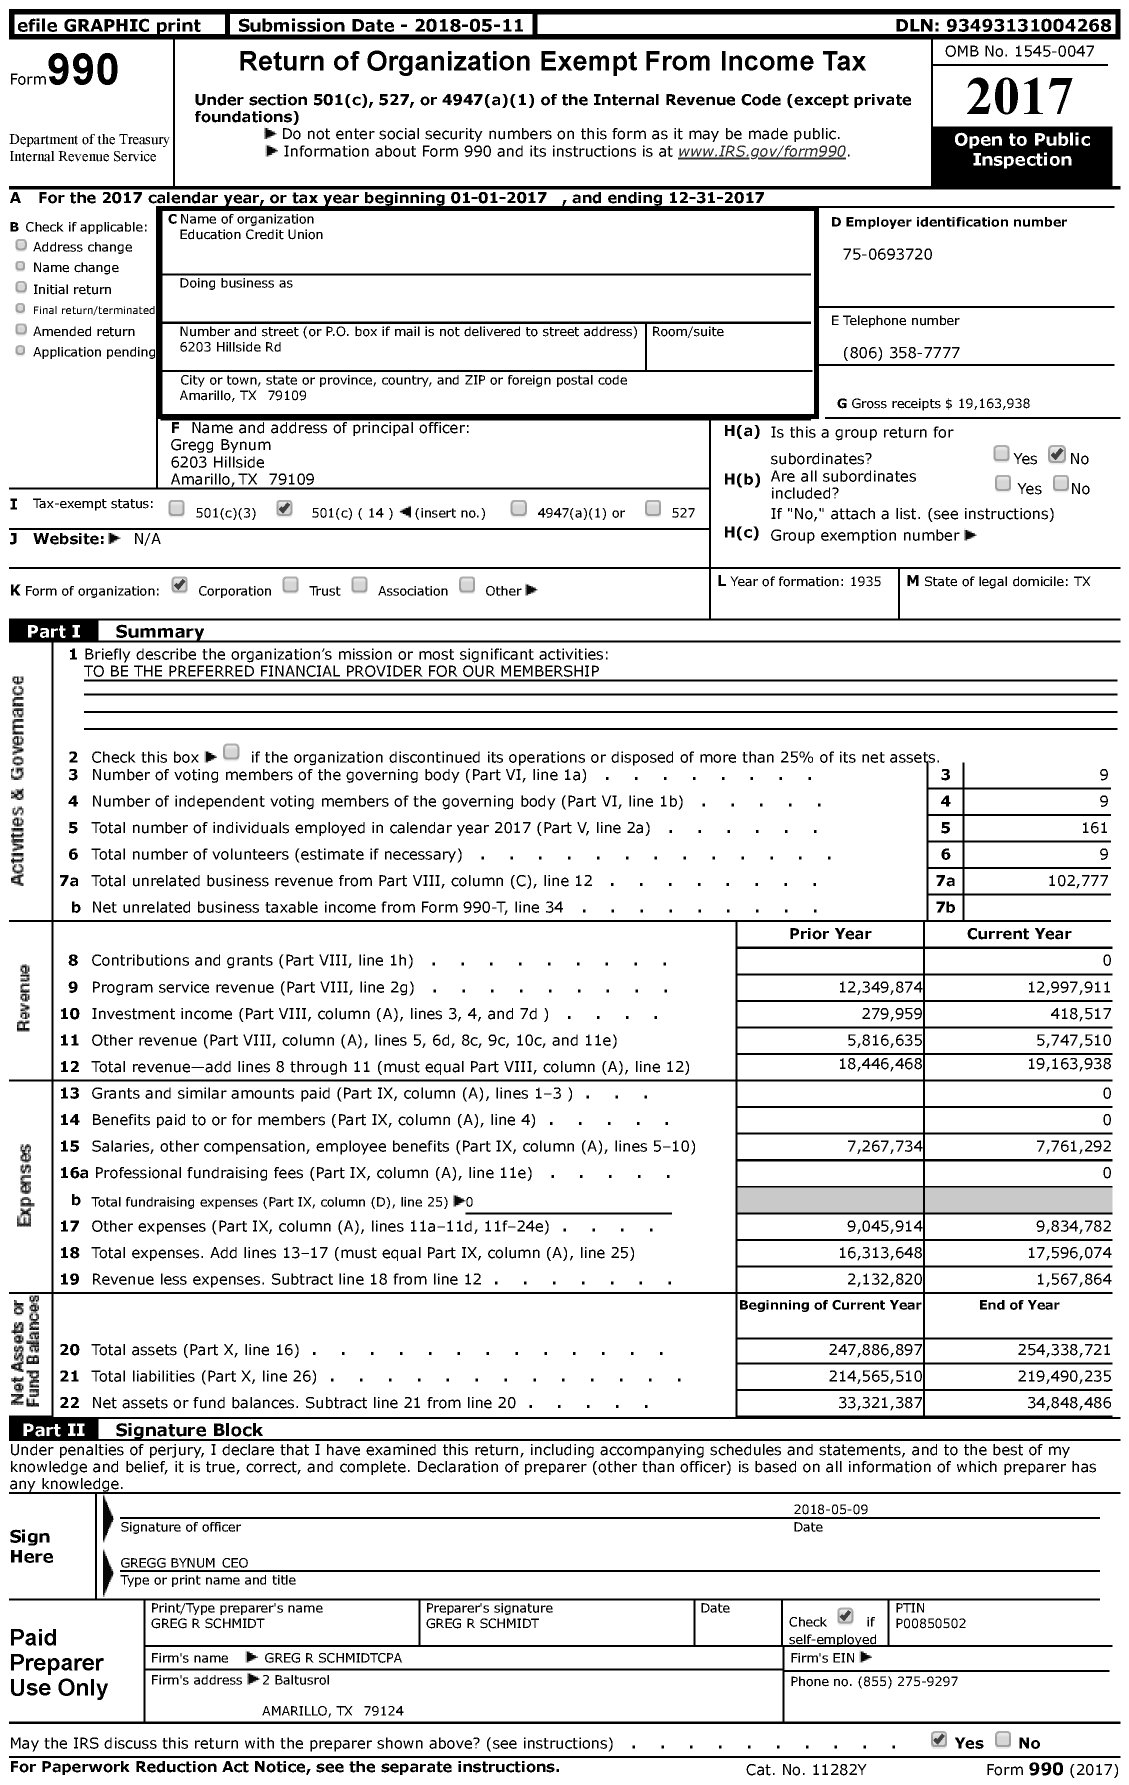 Image of first page of 2017 Form 990 for Education Credit Union (ECU)